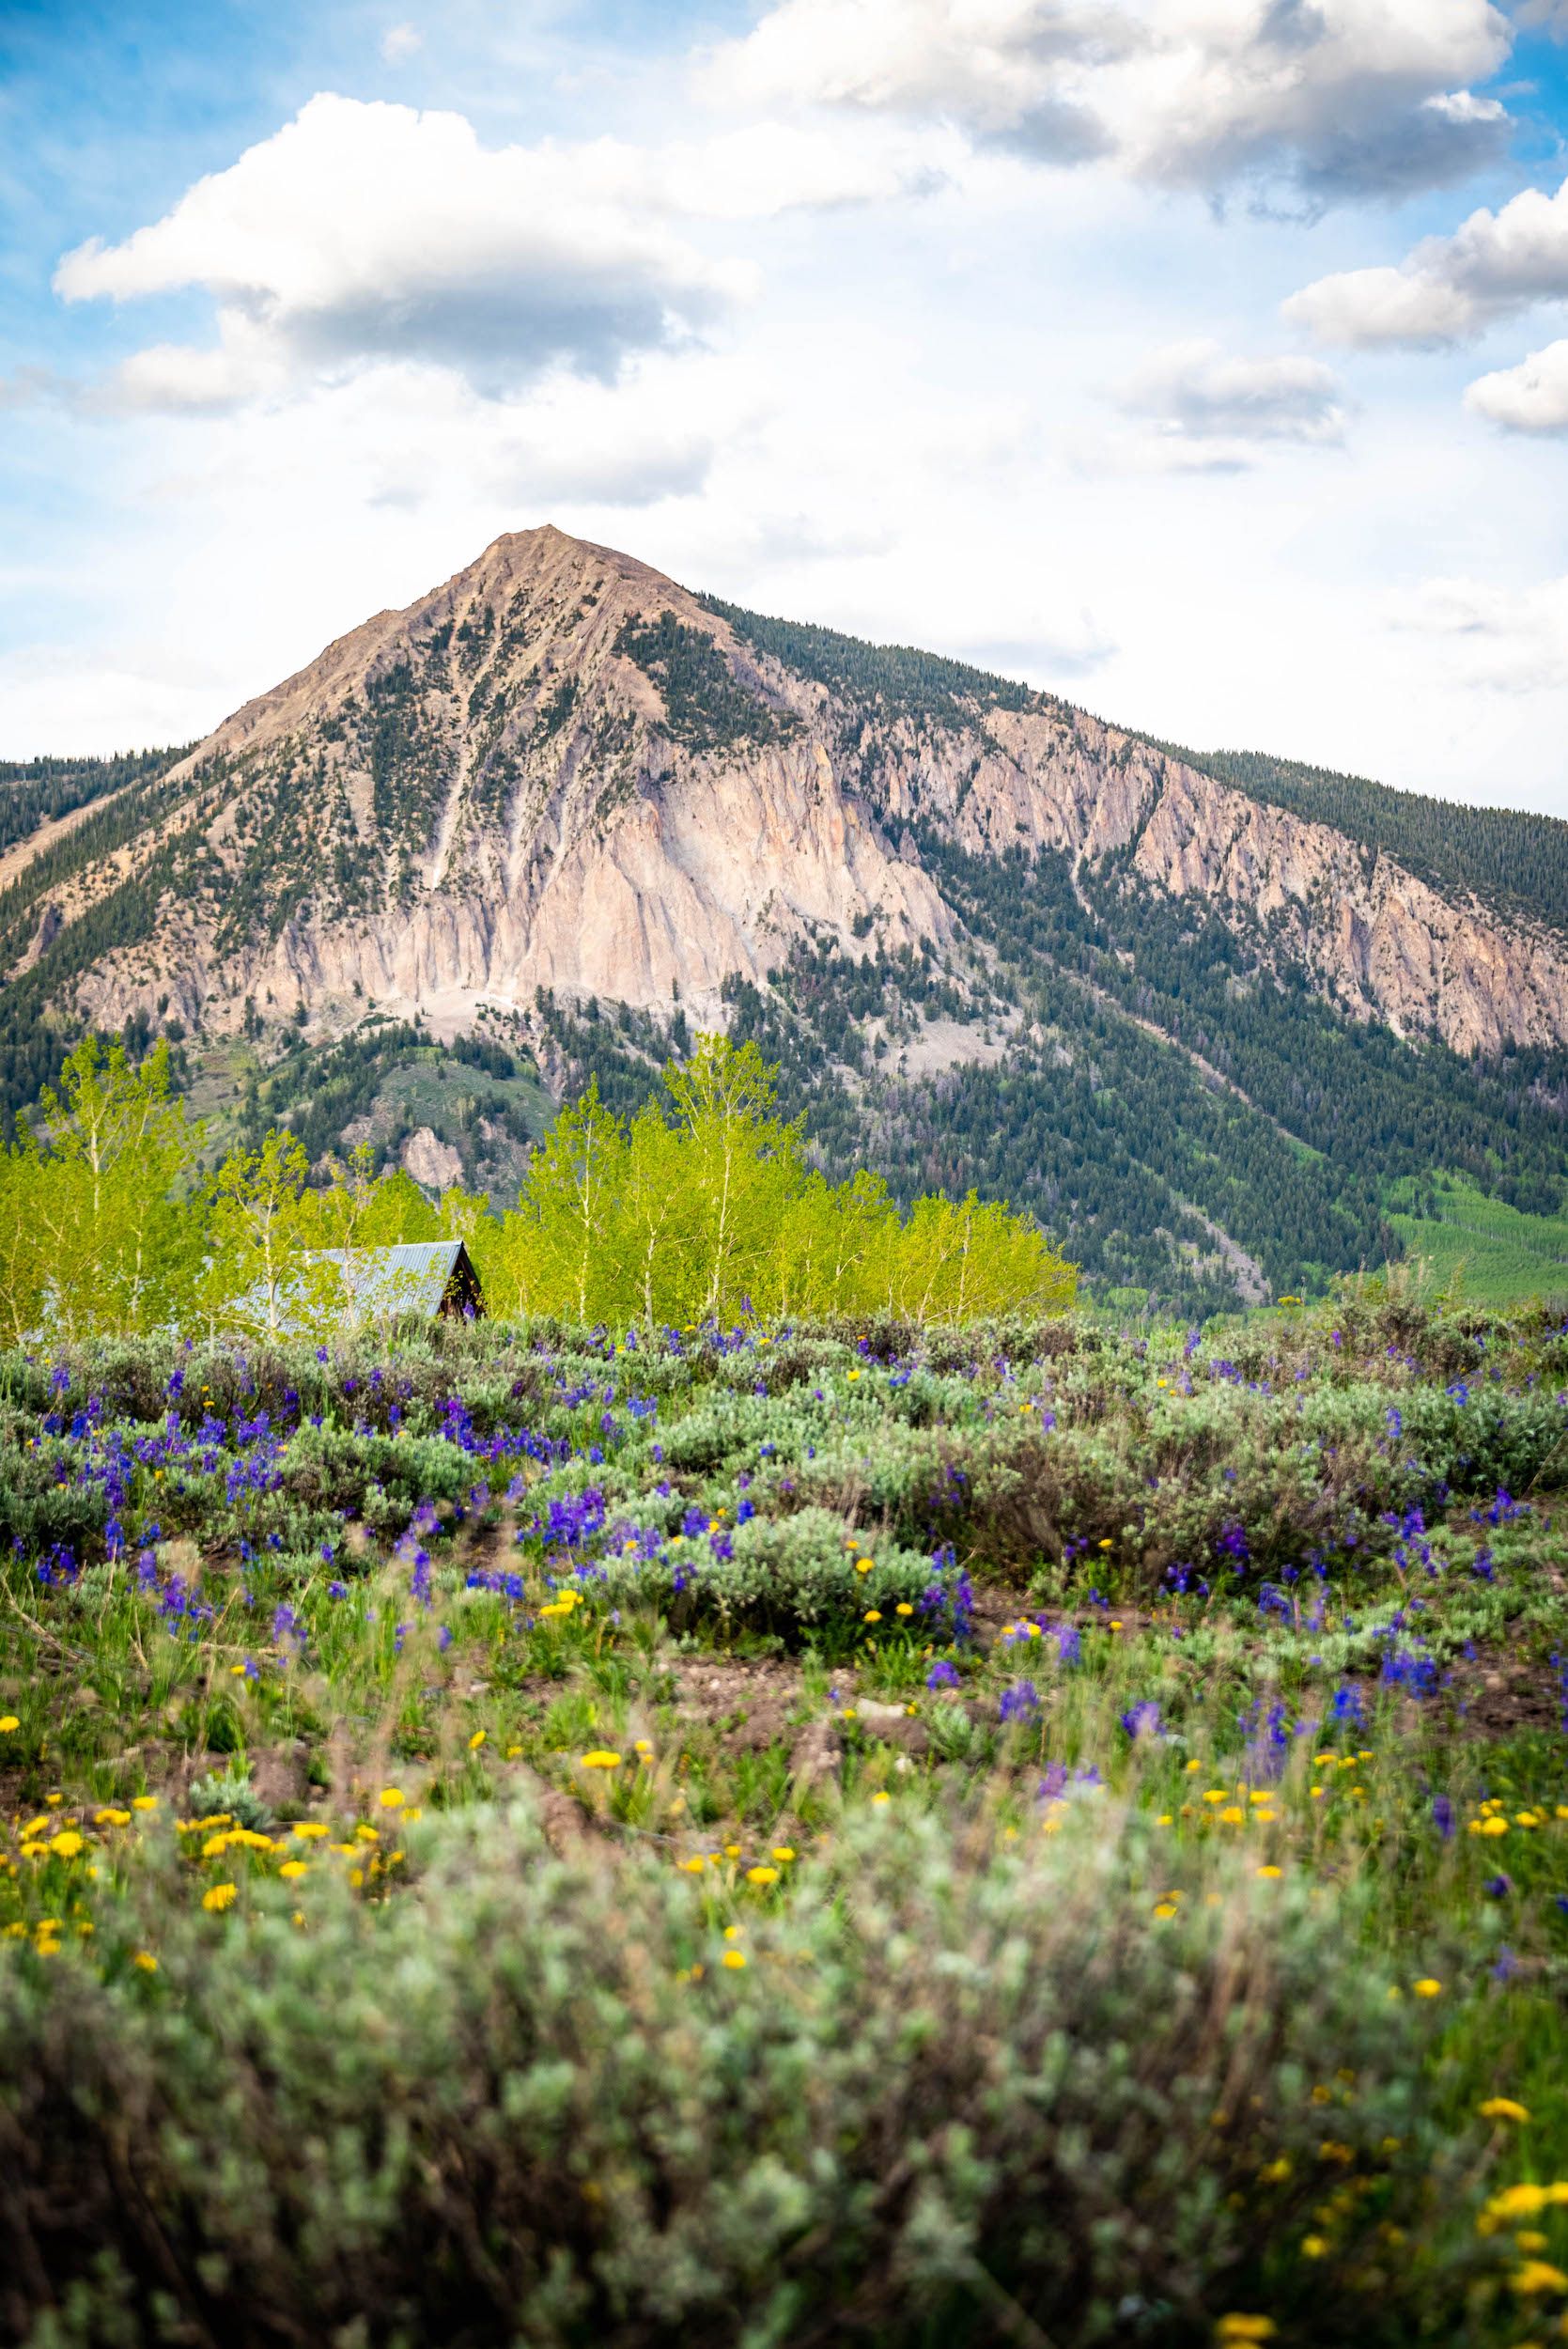 A mountain peak in the background of a field of flowers